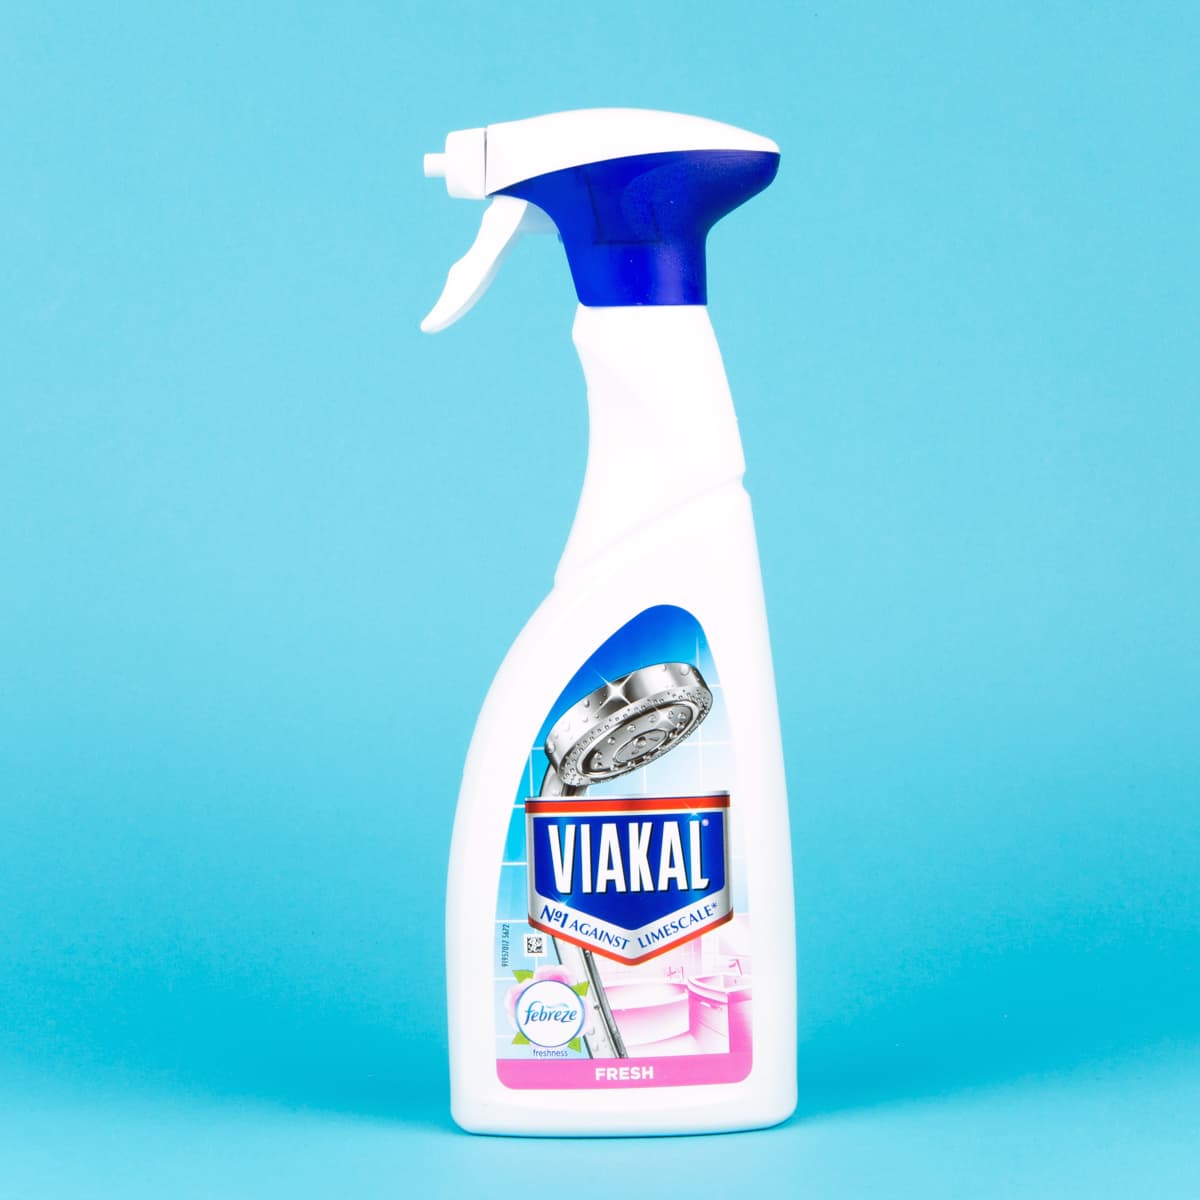 The 7 Best Cult-Favorite British Cleaning Products